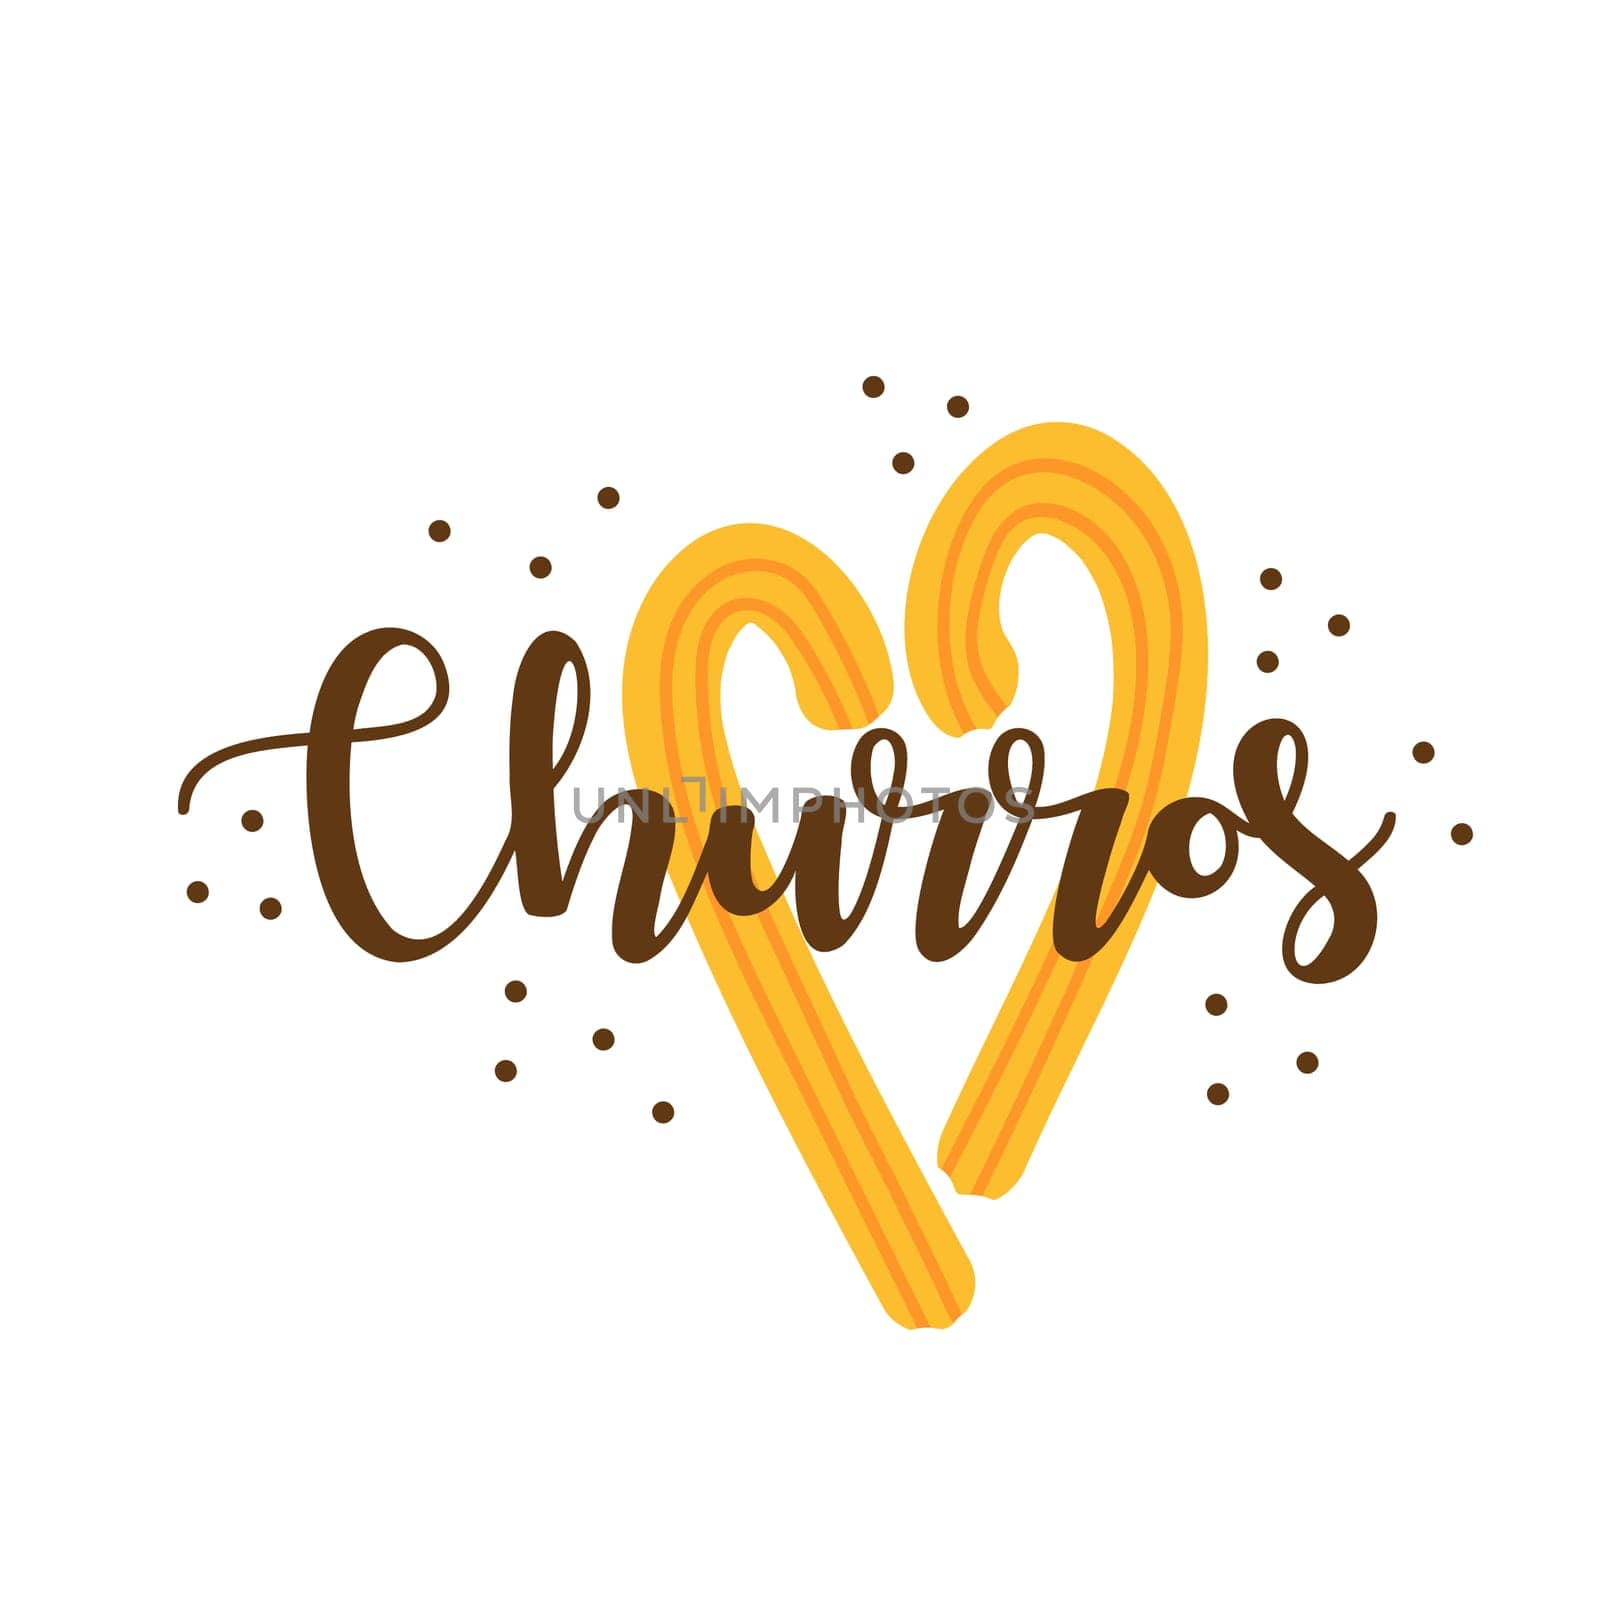 Churros. Hand drawn lettering with churros sticks in shape of heart. Vector by natali_brill